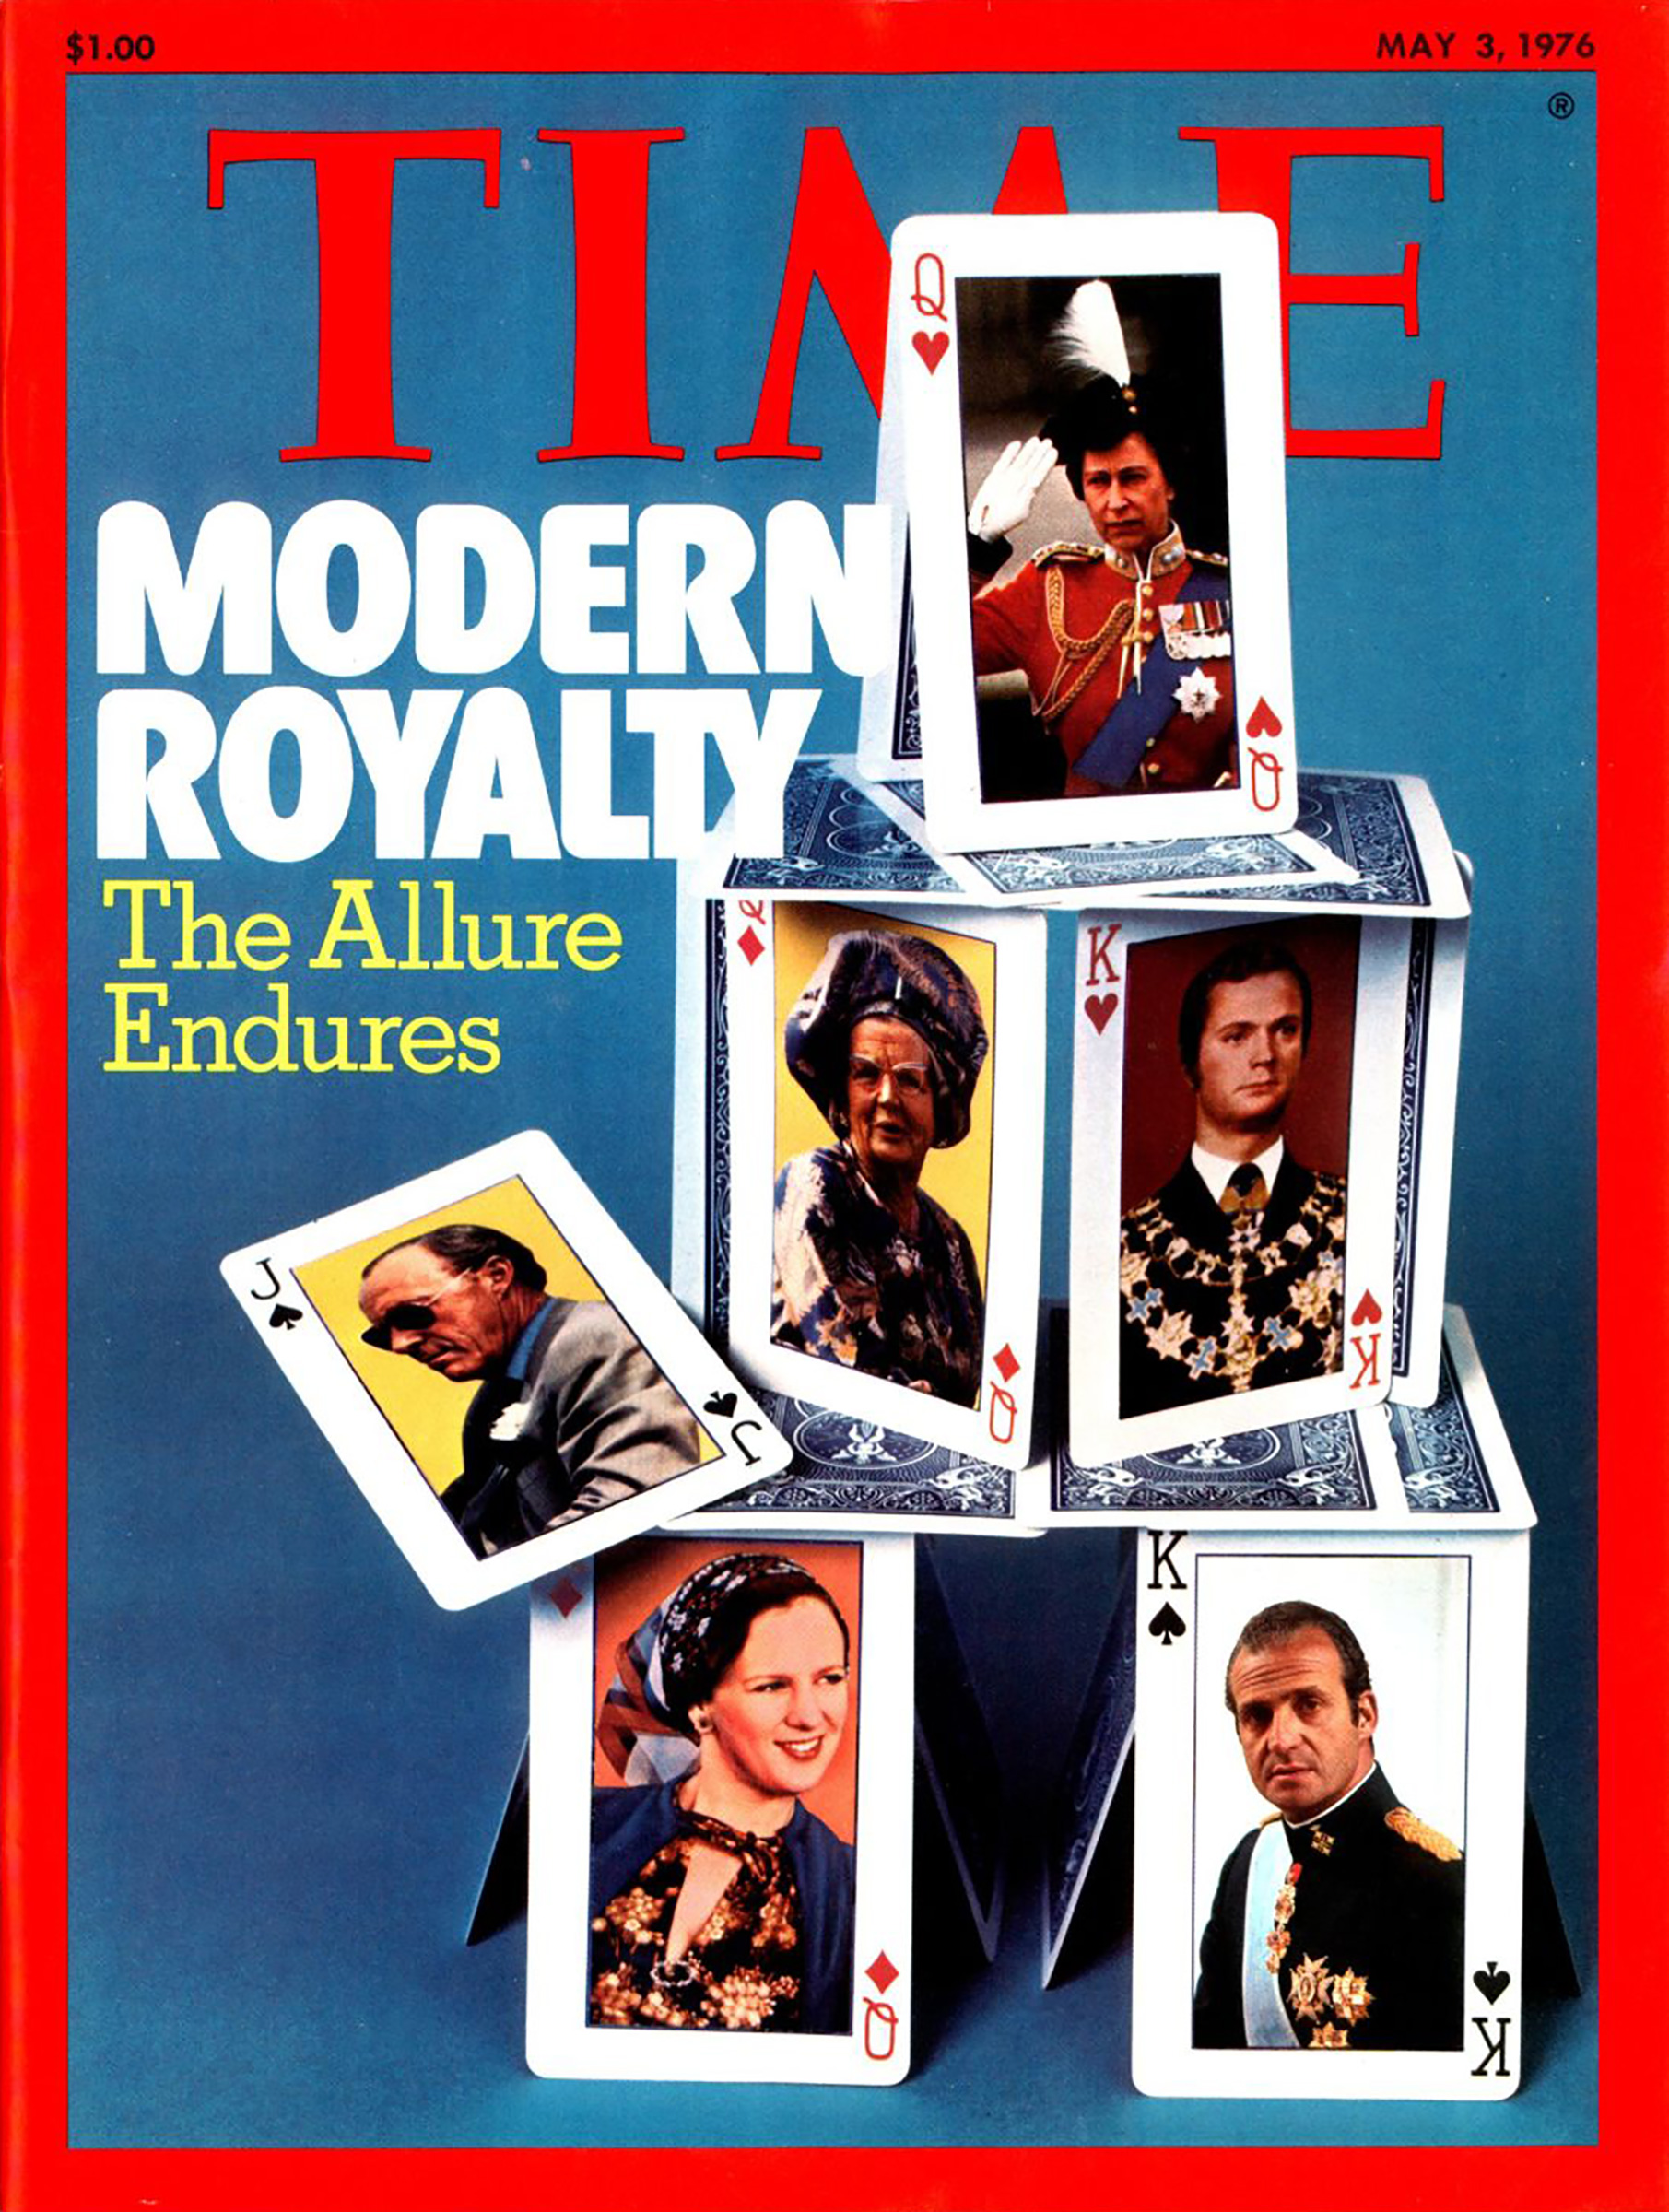 Queen Elizabeth (at top)—along with Carl XVI Gustaf of Sweden, Juan Carlos of Spain, Margrethe of Denmark, and Bernhard and Juliana of the Netherlands—on the May 3, 1976, cover of TIME ((Top, clockwise) Serge Lemoine-Sygma; Agence Norma; Eddie Adams; Hubert le Campion-Sygma; Daniel Simon-Gamma/Liaison)